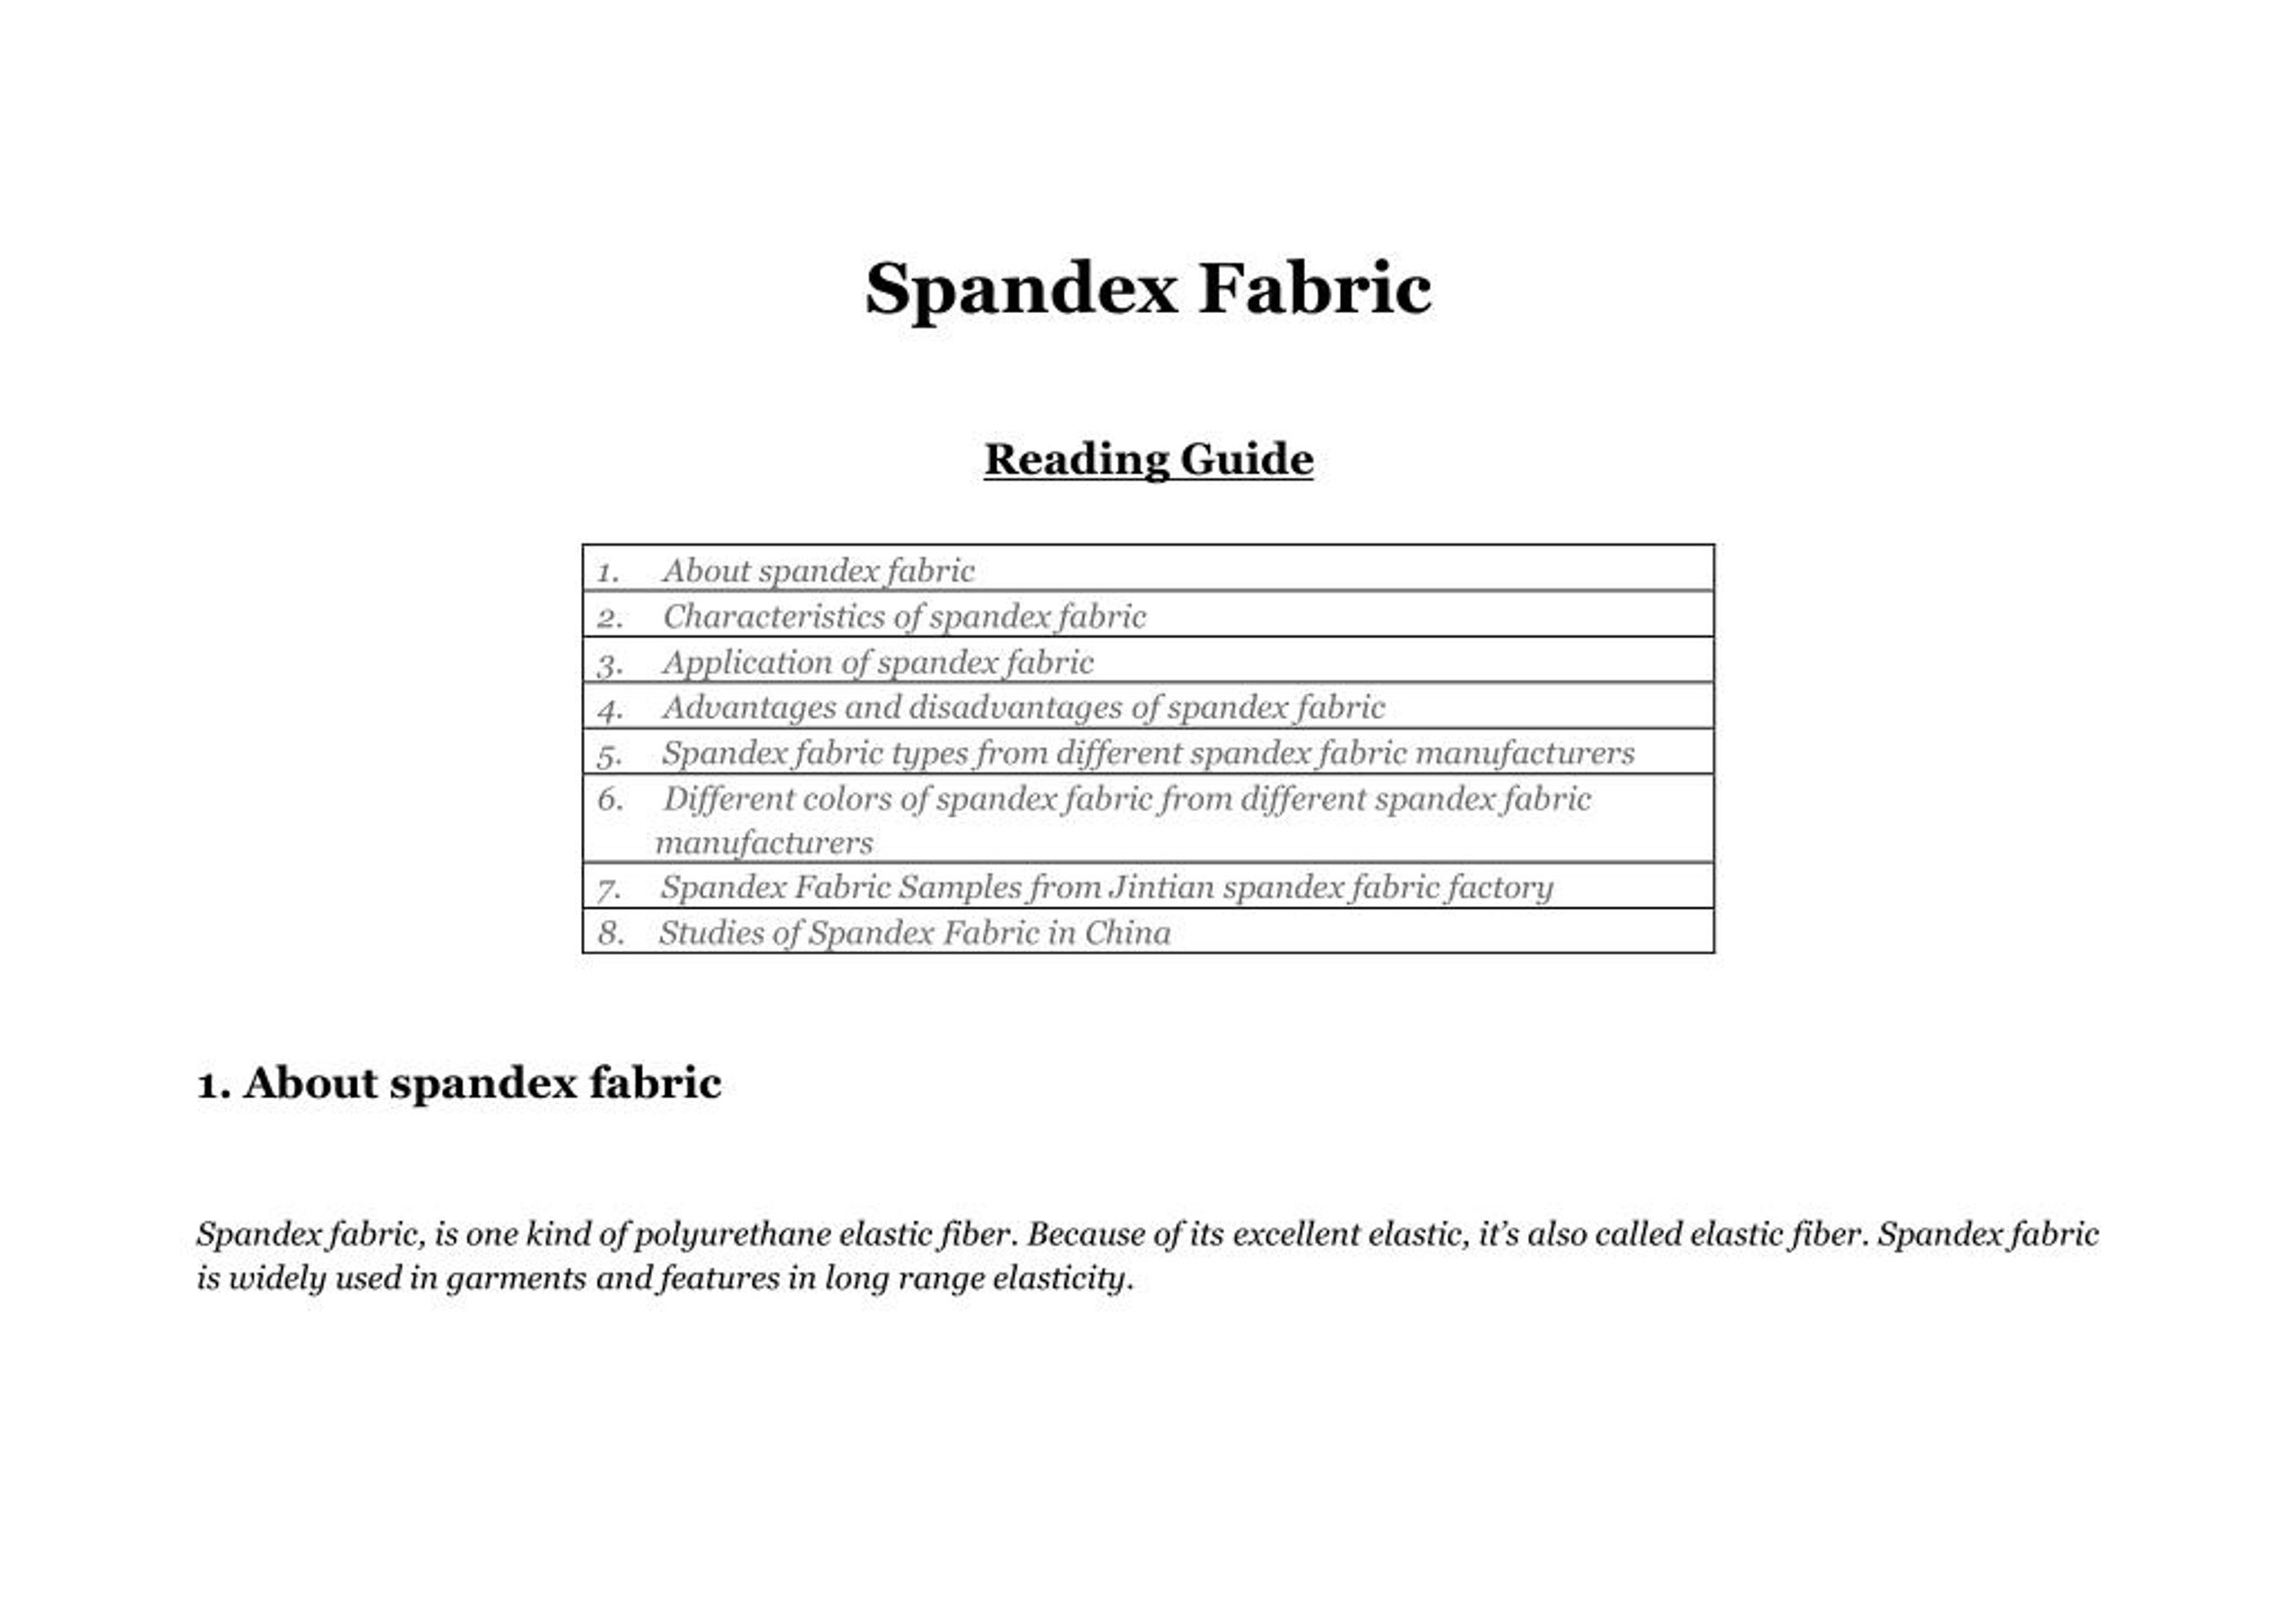 PPT - spandex fabric PowerPoint Presentation, free download - ID:7275050